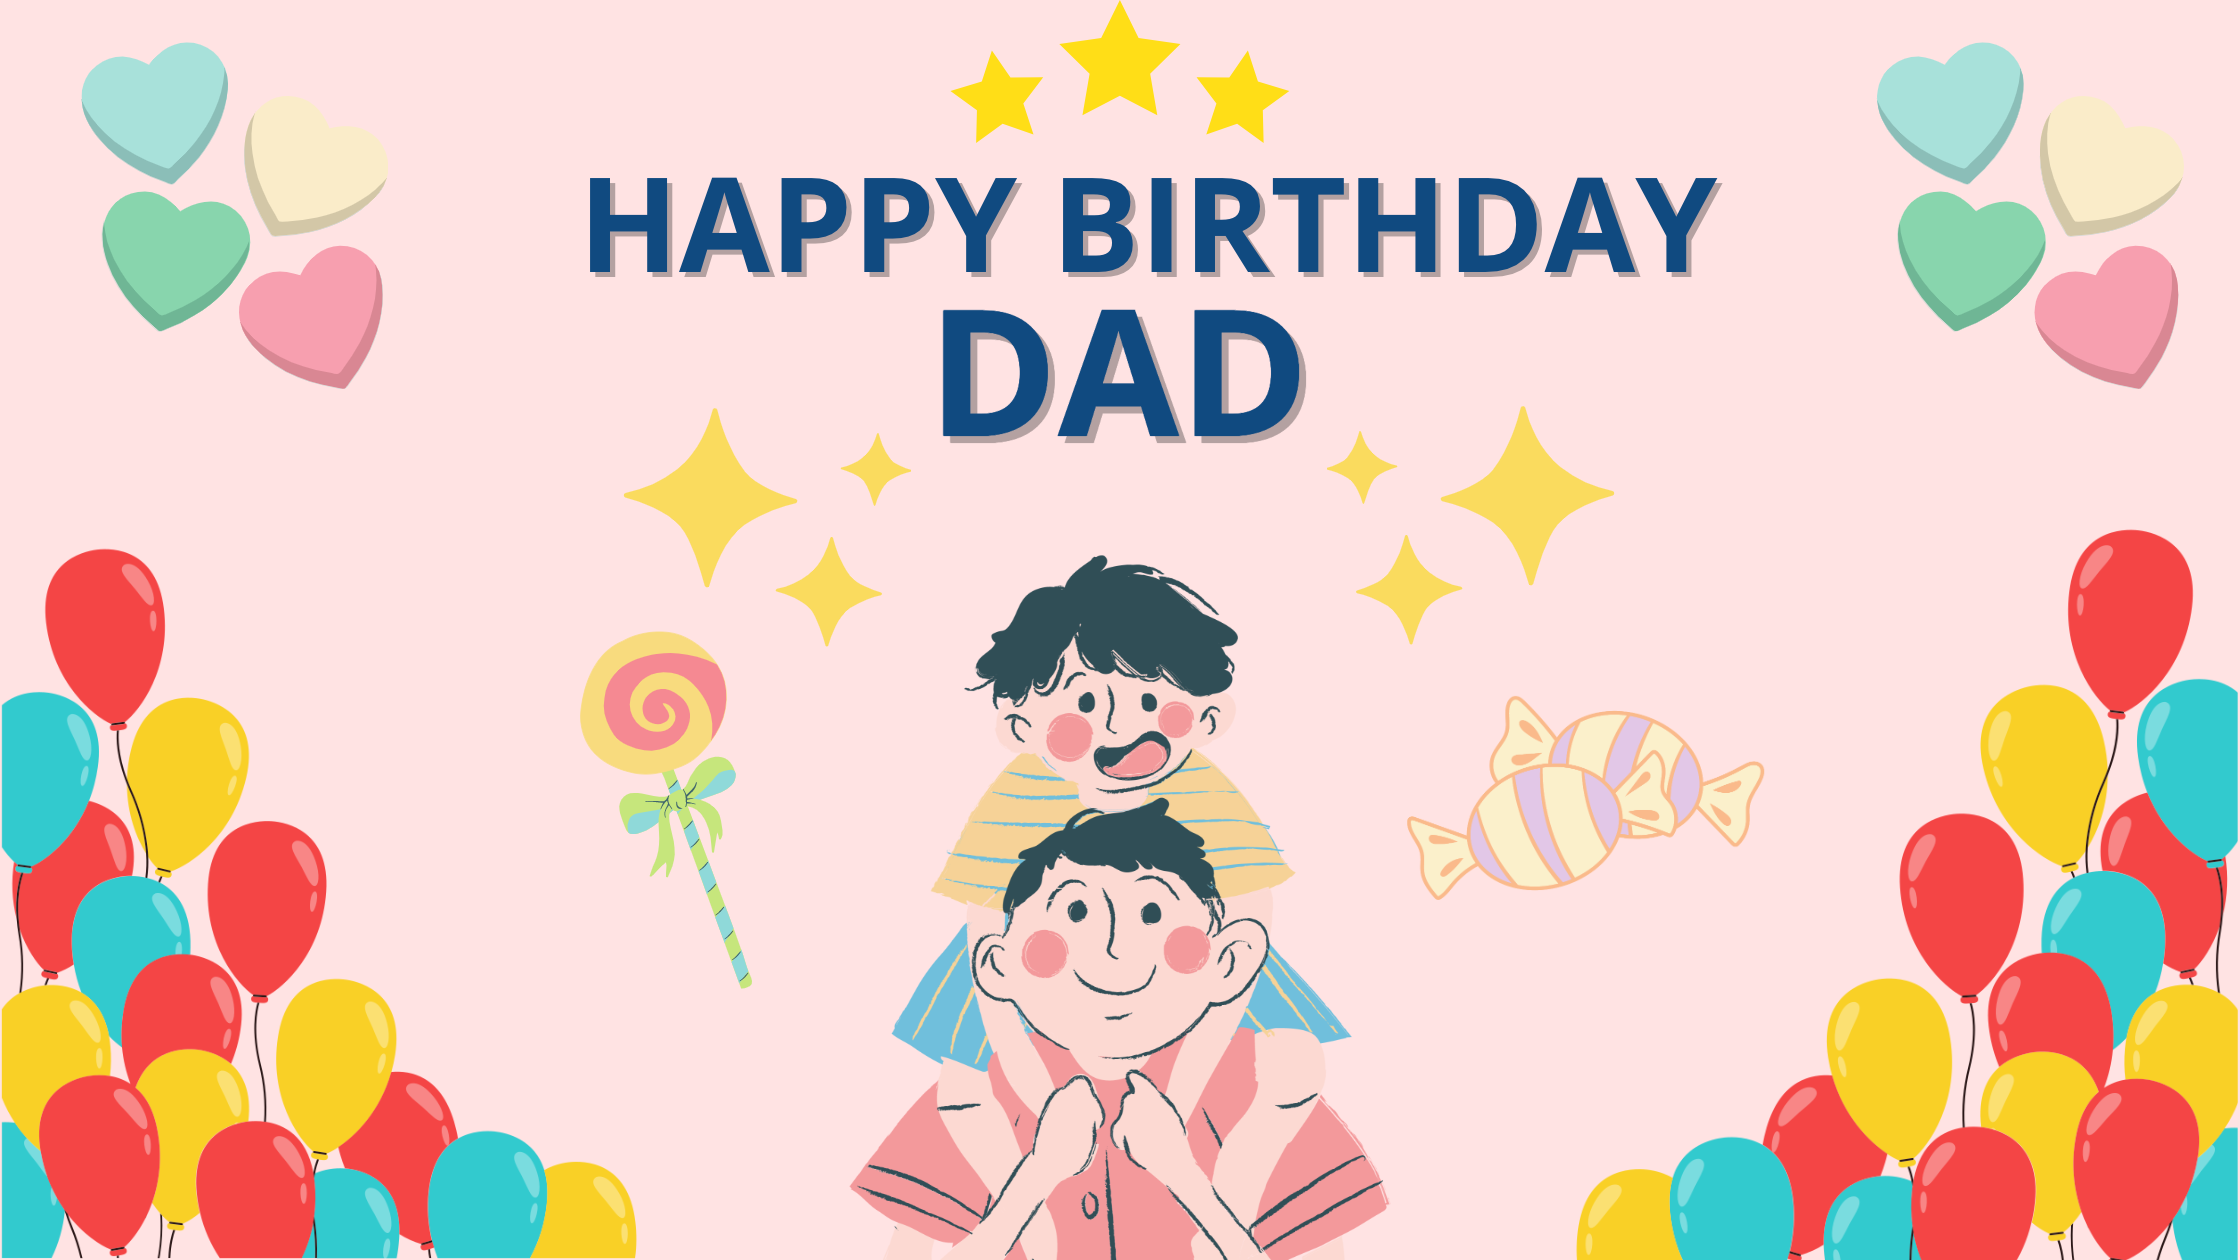 Heart Touching Birthday Wishes for Dad